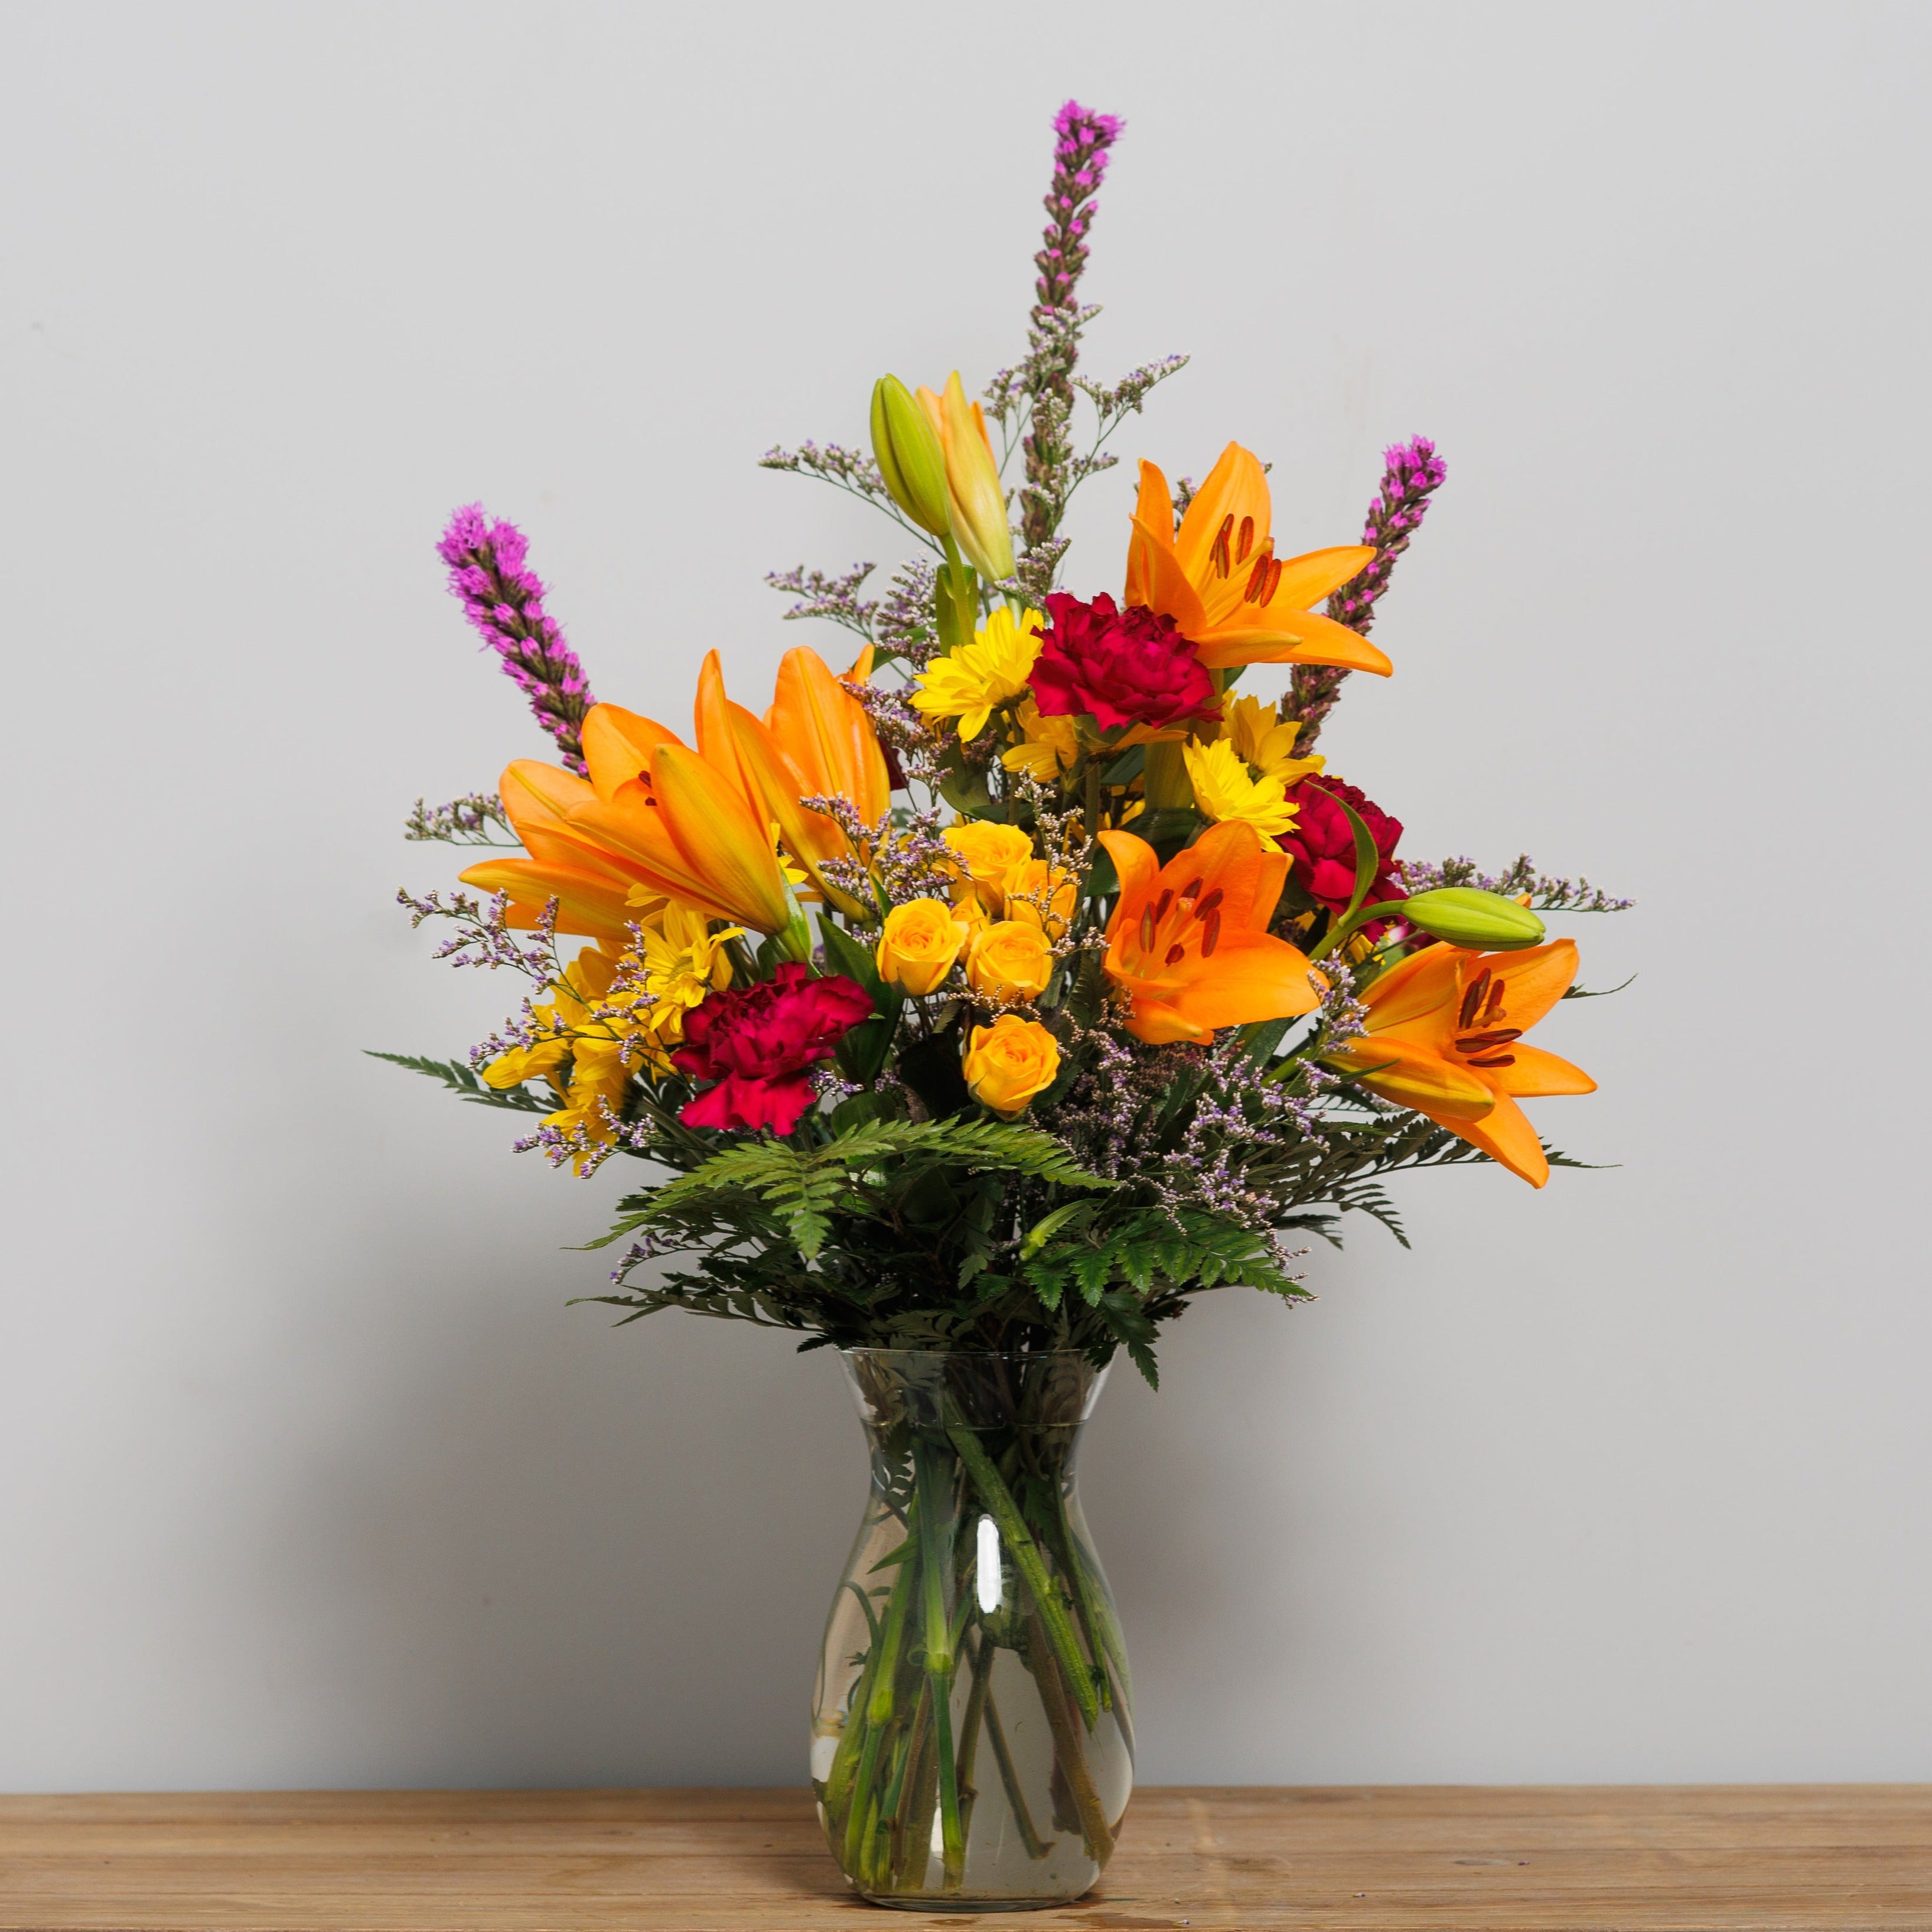 A floral arrangement with orange lilies, yellow spray roses and fuchsia liatris.  